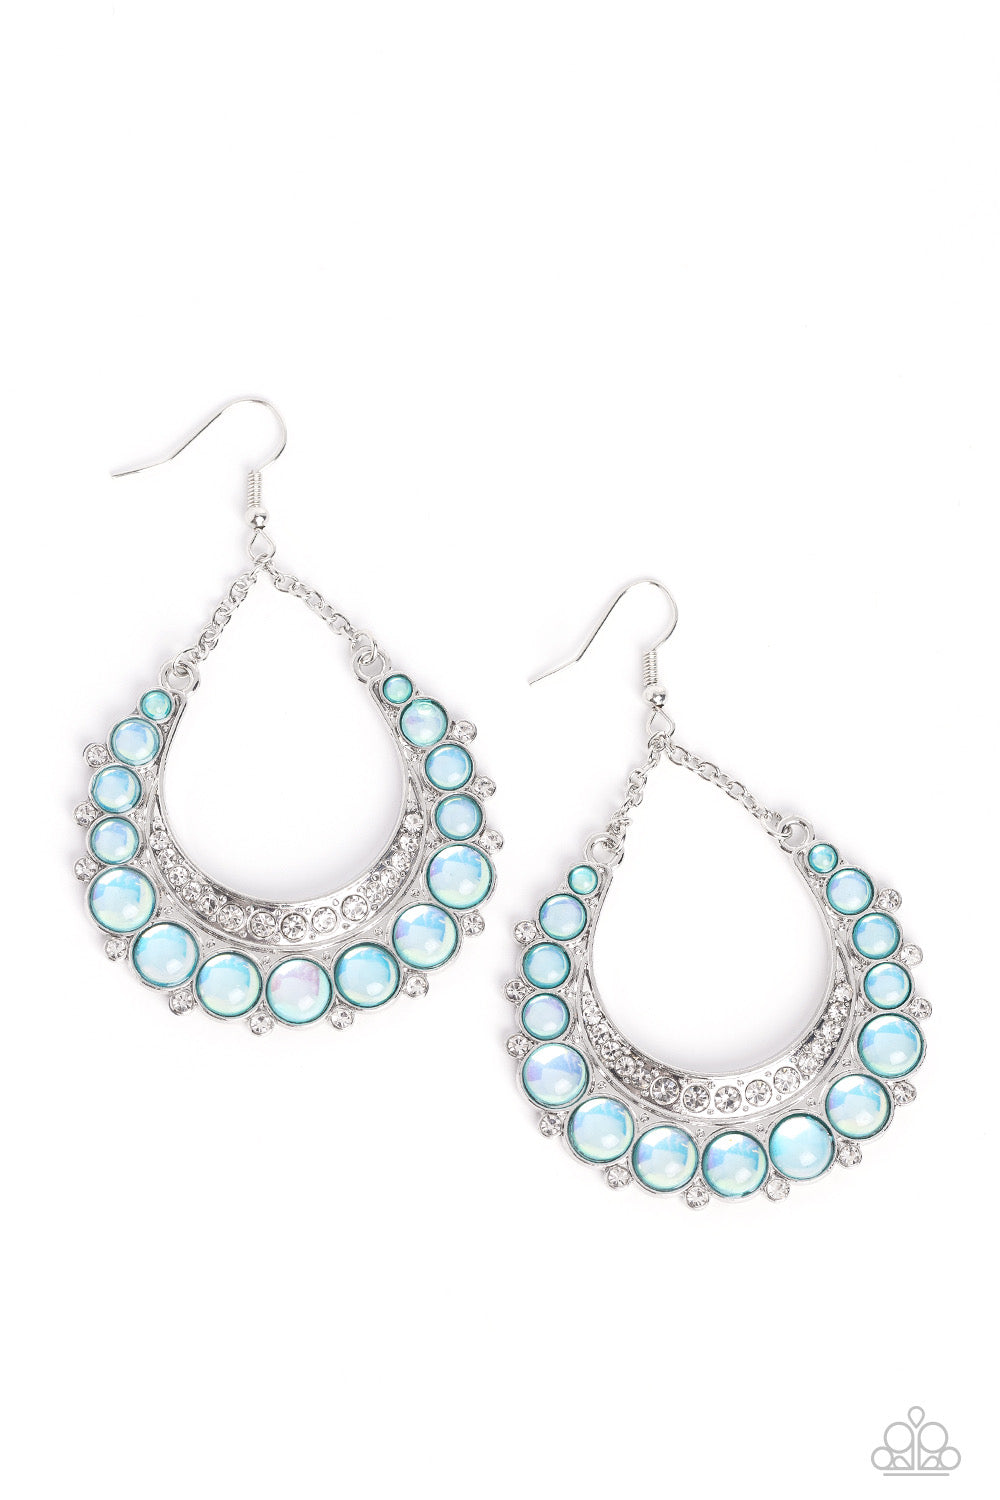 Paparazzi Bubbly Bling - Blue Earrings -Paparazzi Jewelry Images